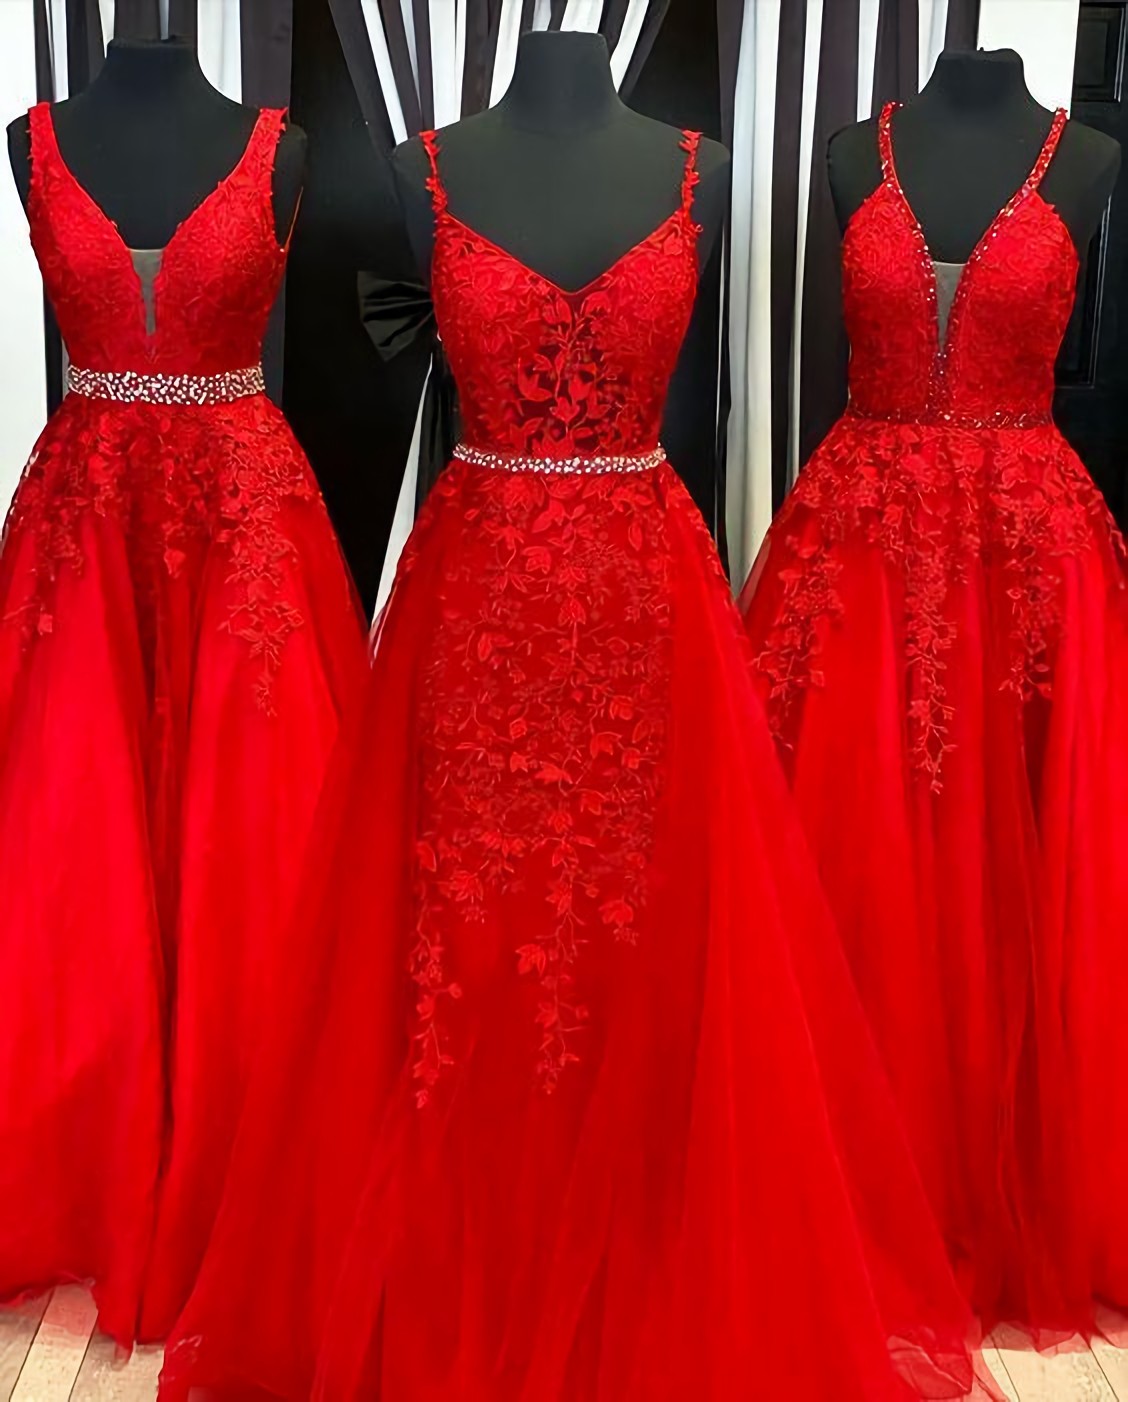 Bridesmaid Dresses Wedding, A Line Red Beaded Tulle Gown Prom Dresses